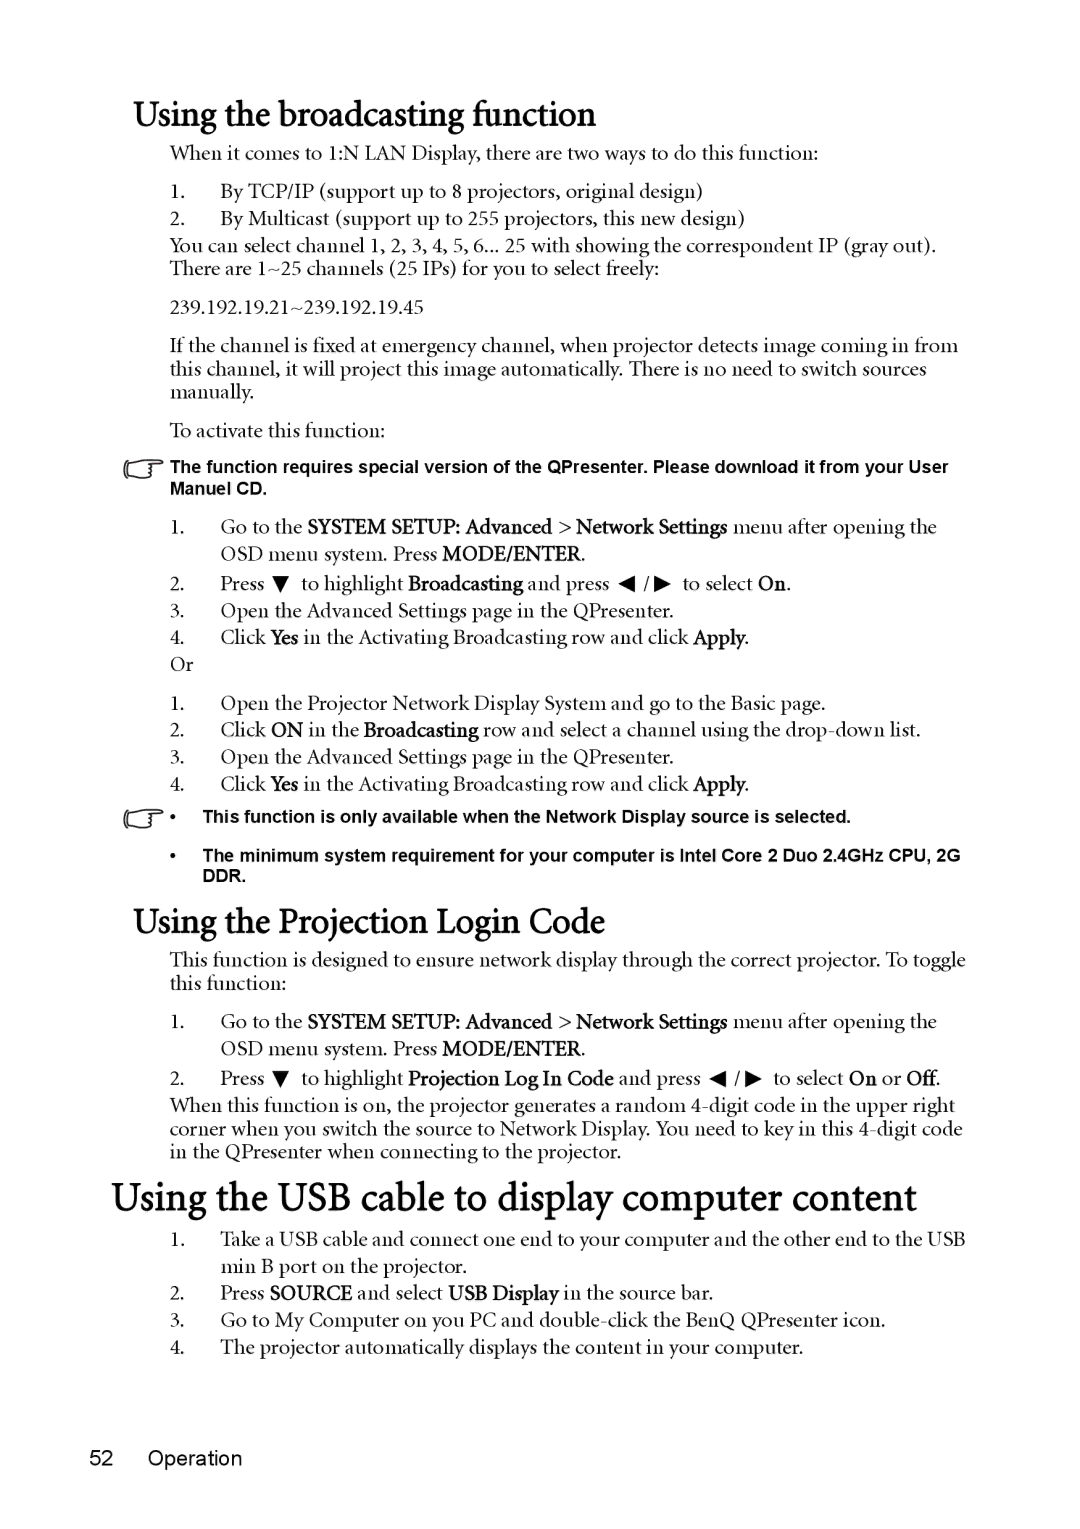 BenQ MX764 user manual Using the USB cable to display computer content, Using the broadcasting function 